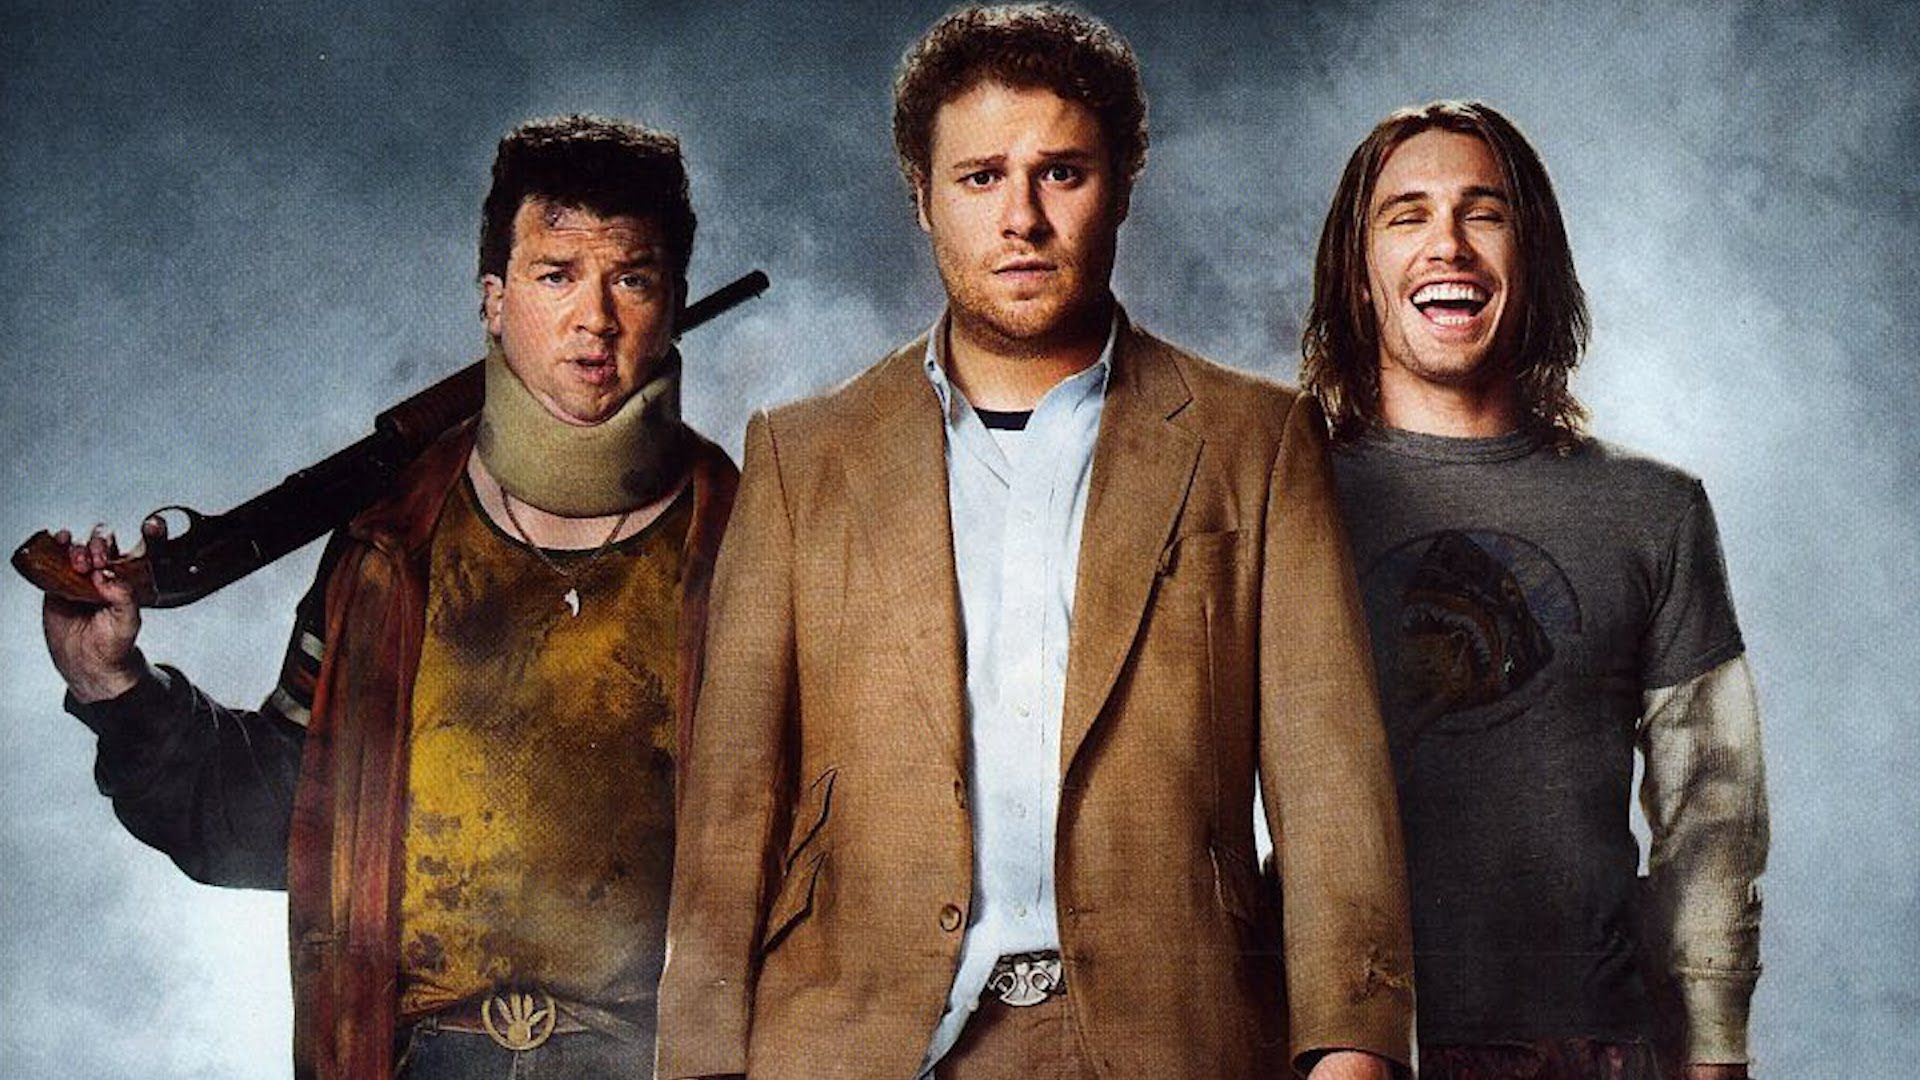 Dealing With Pineapple Express (The Storm) With Help From